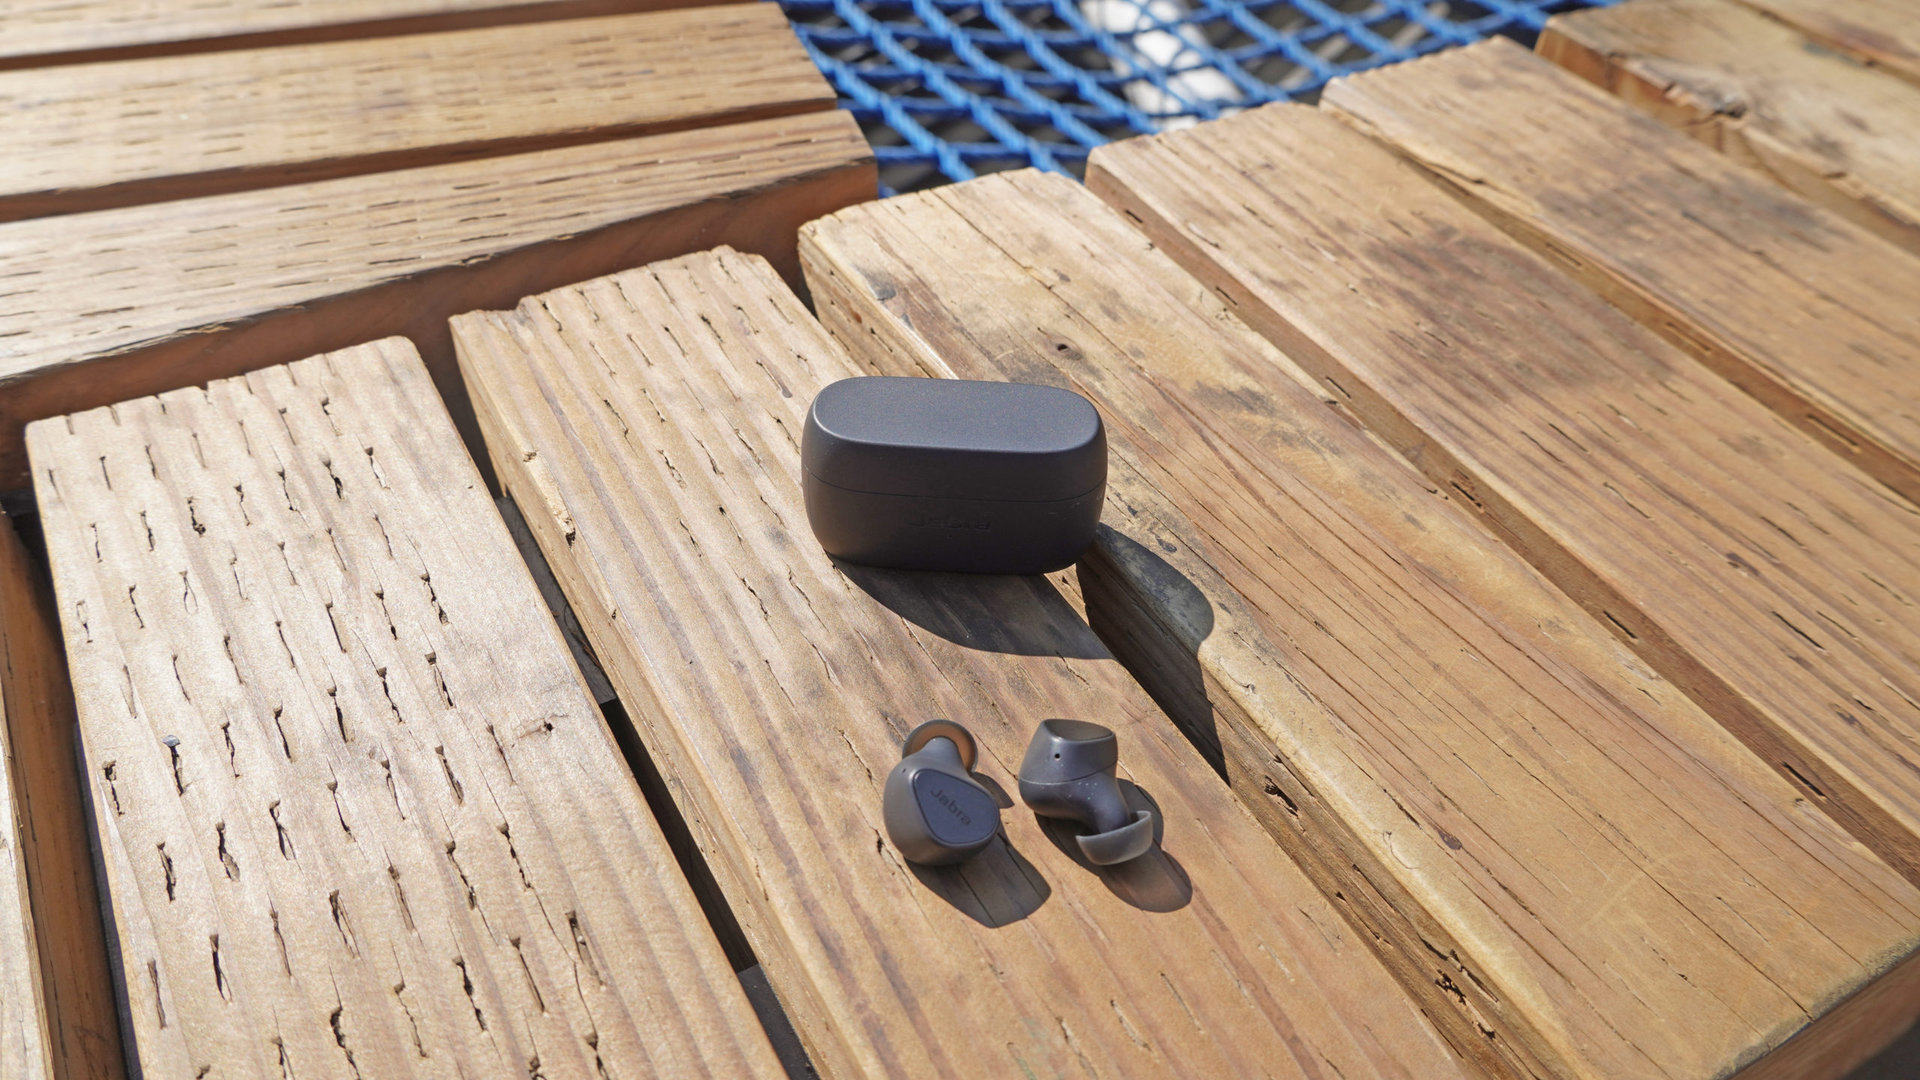 The Jabra Elite 3 earbuds sitting next to their case outdoors on a wooden bench.